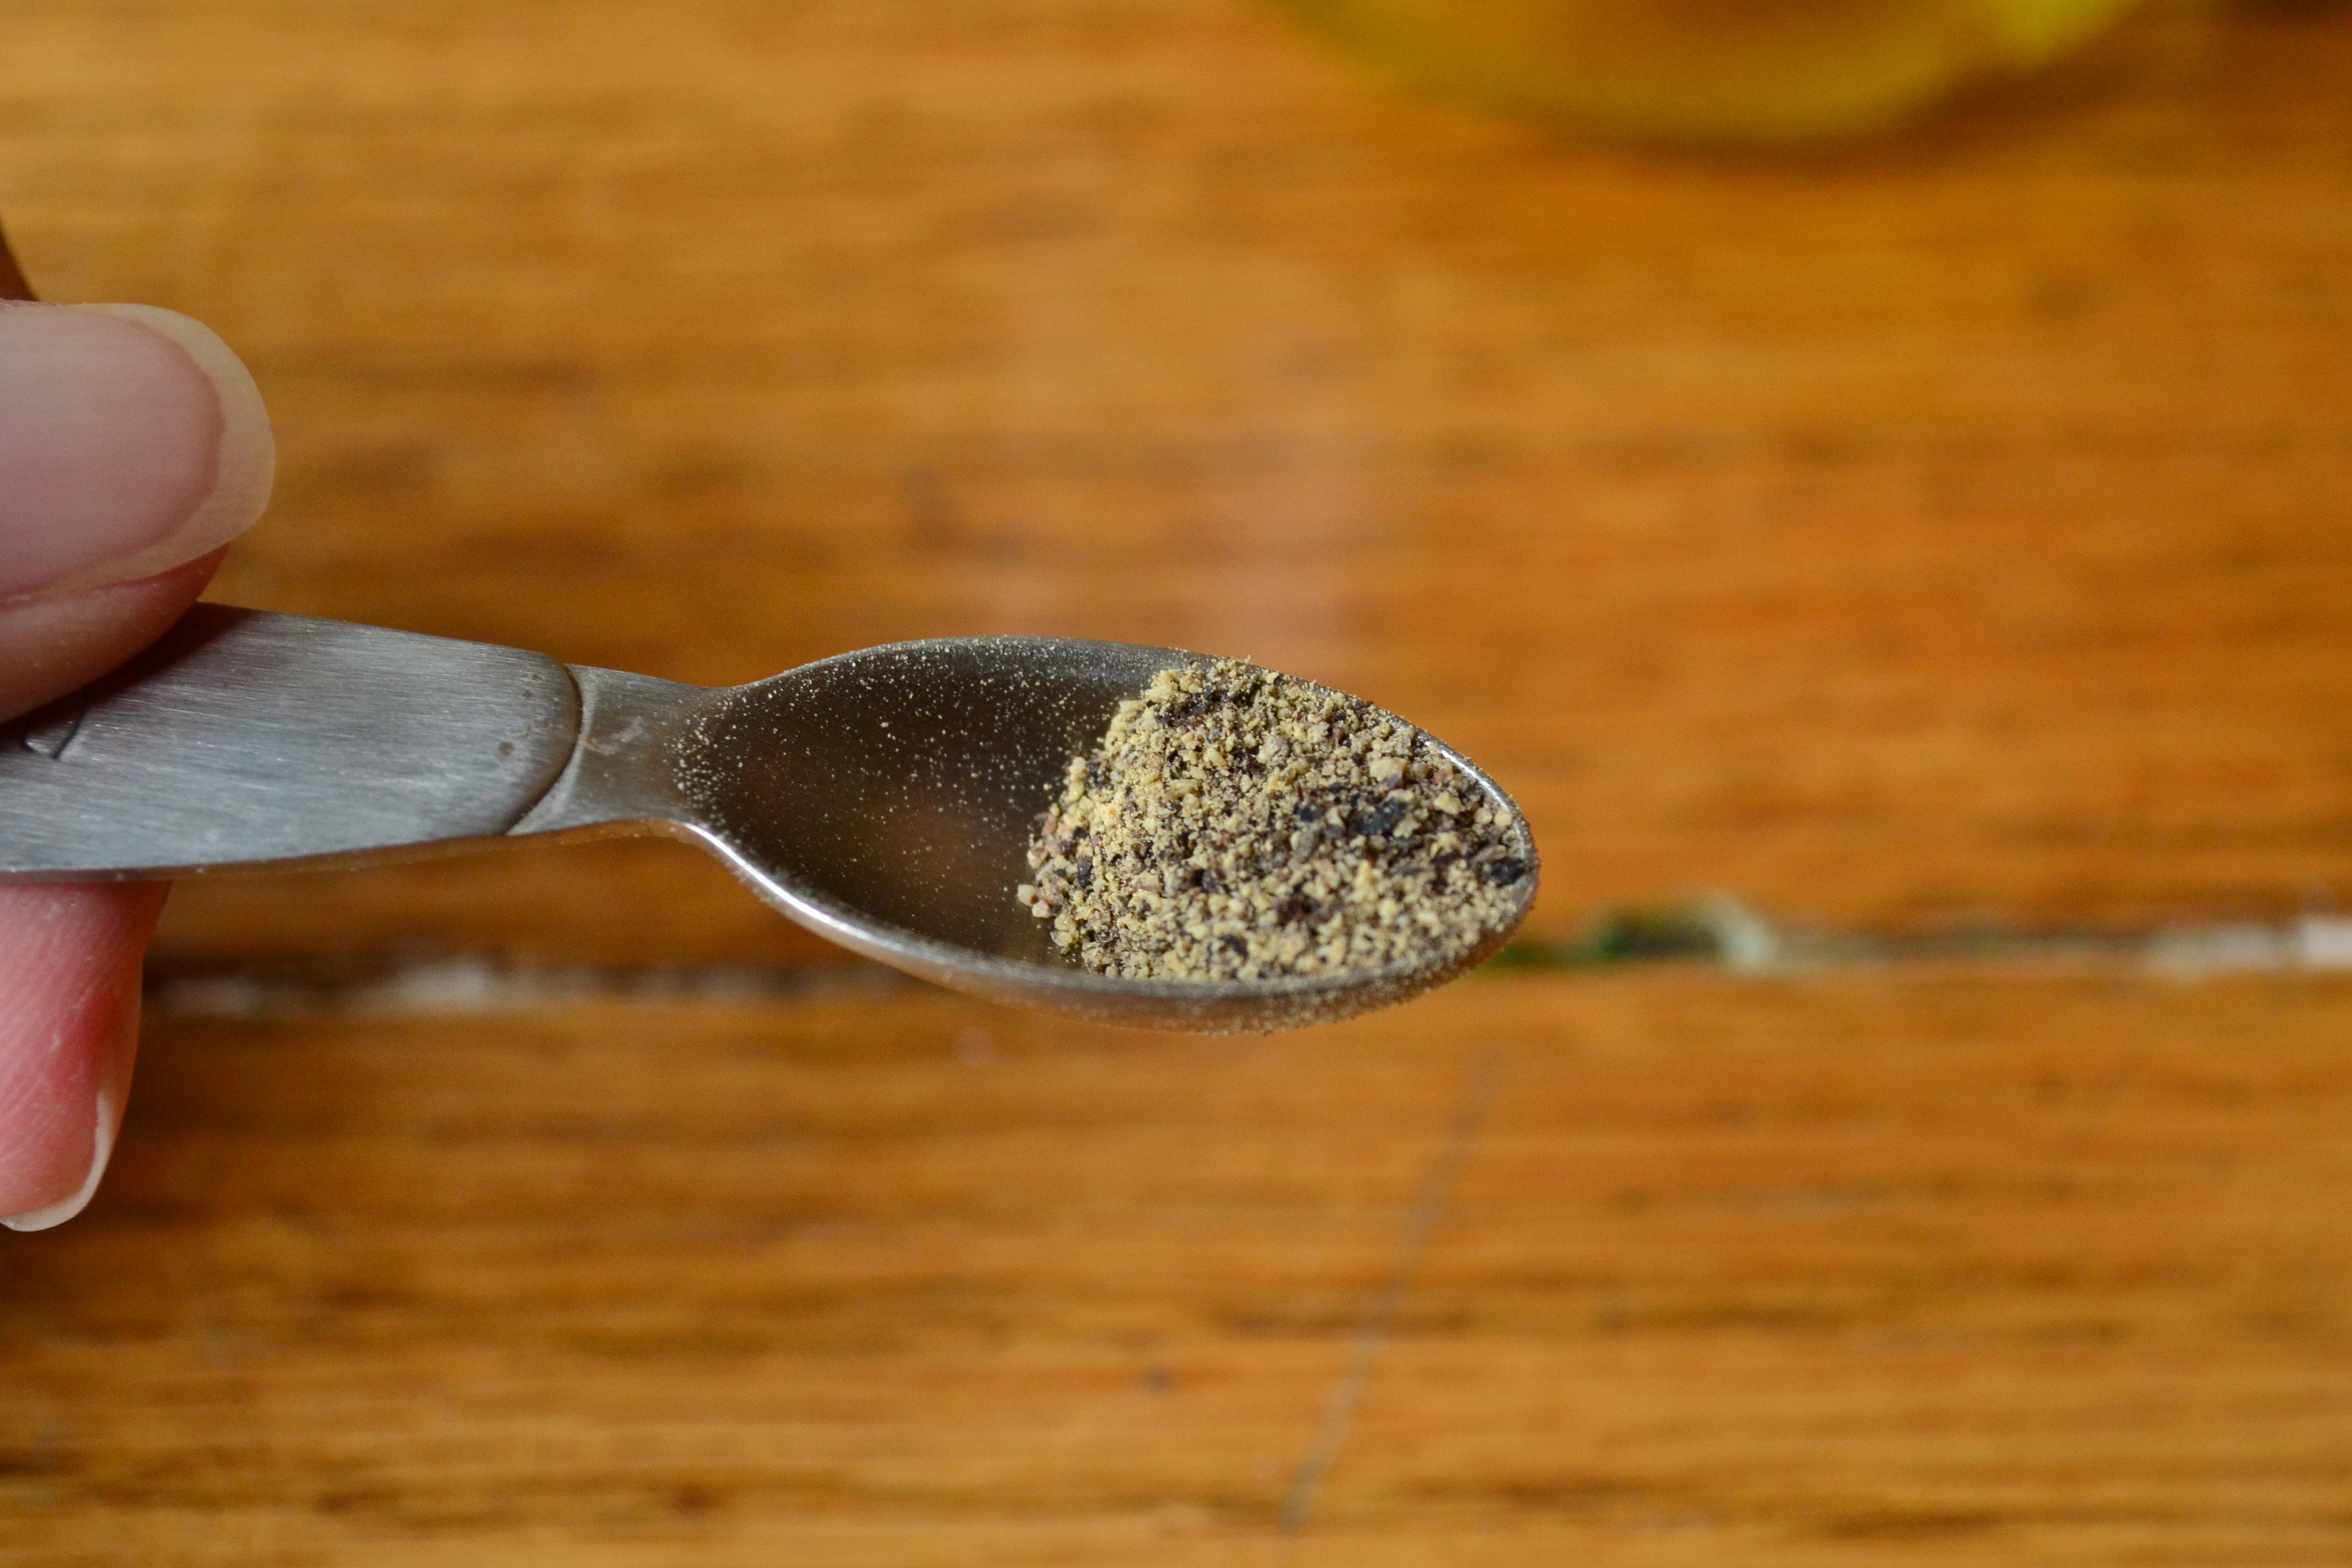 What is 1/8 of a teaspoon?